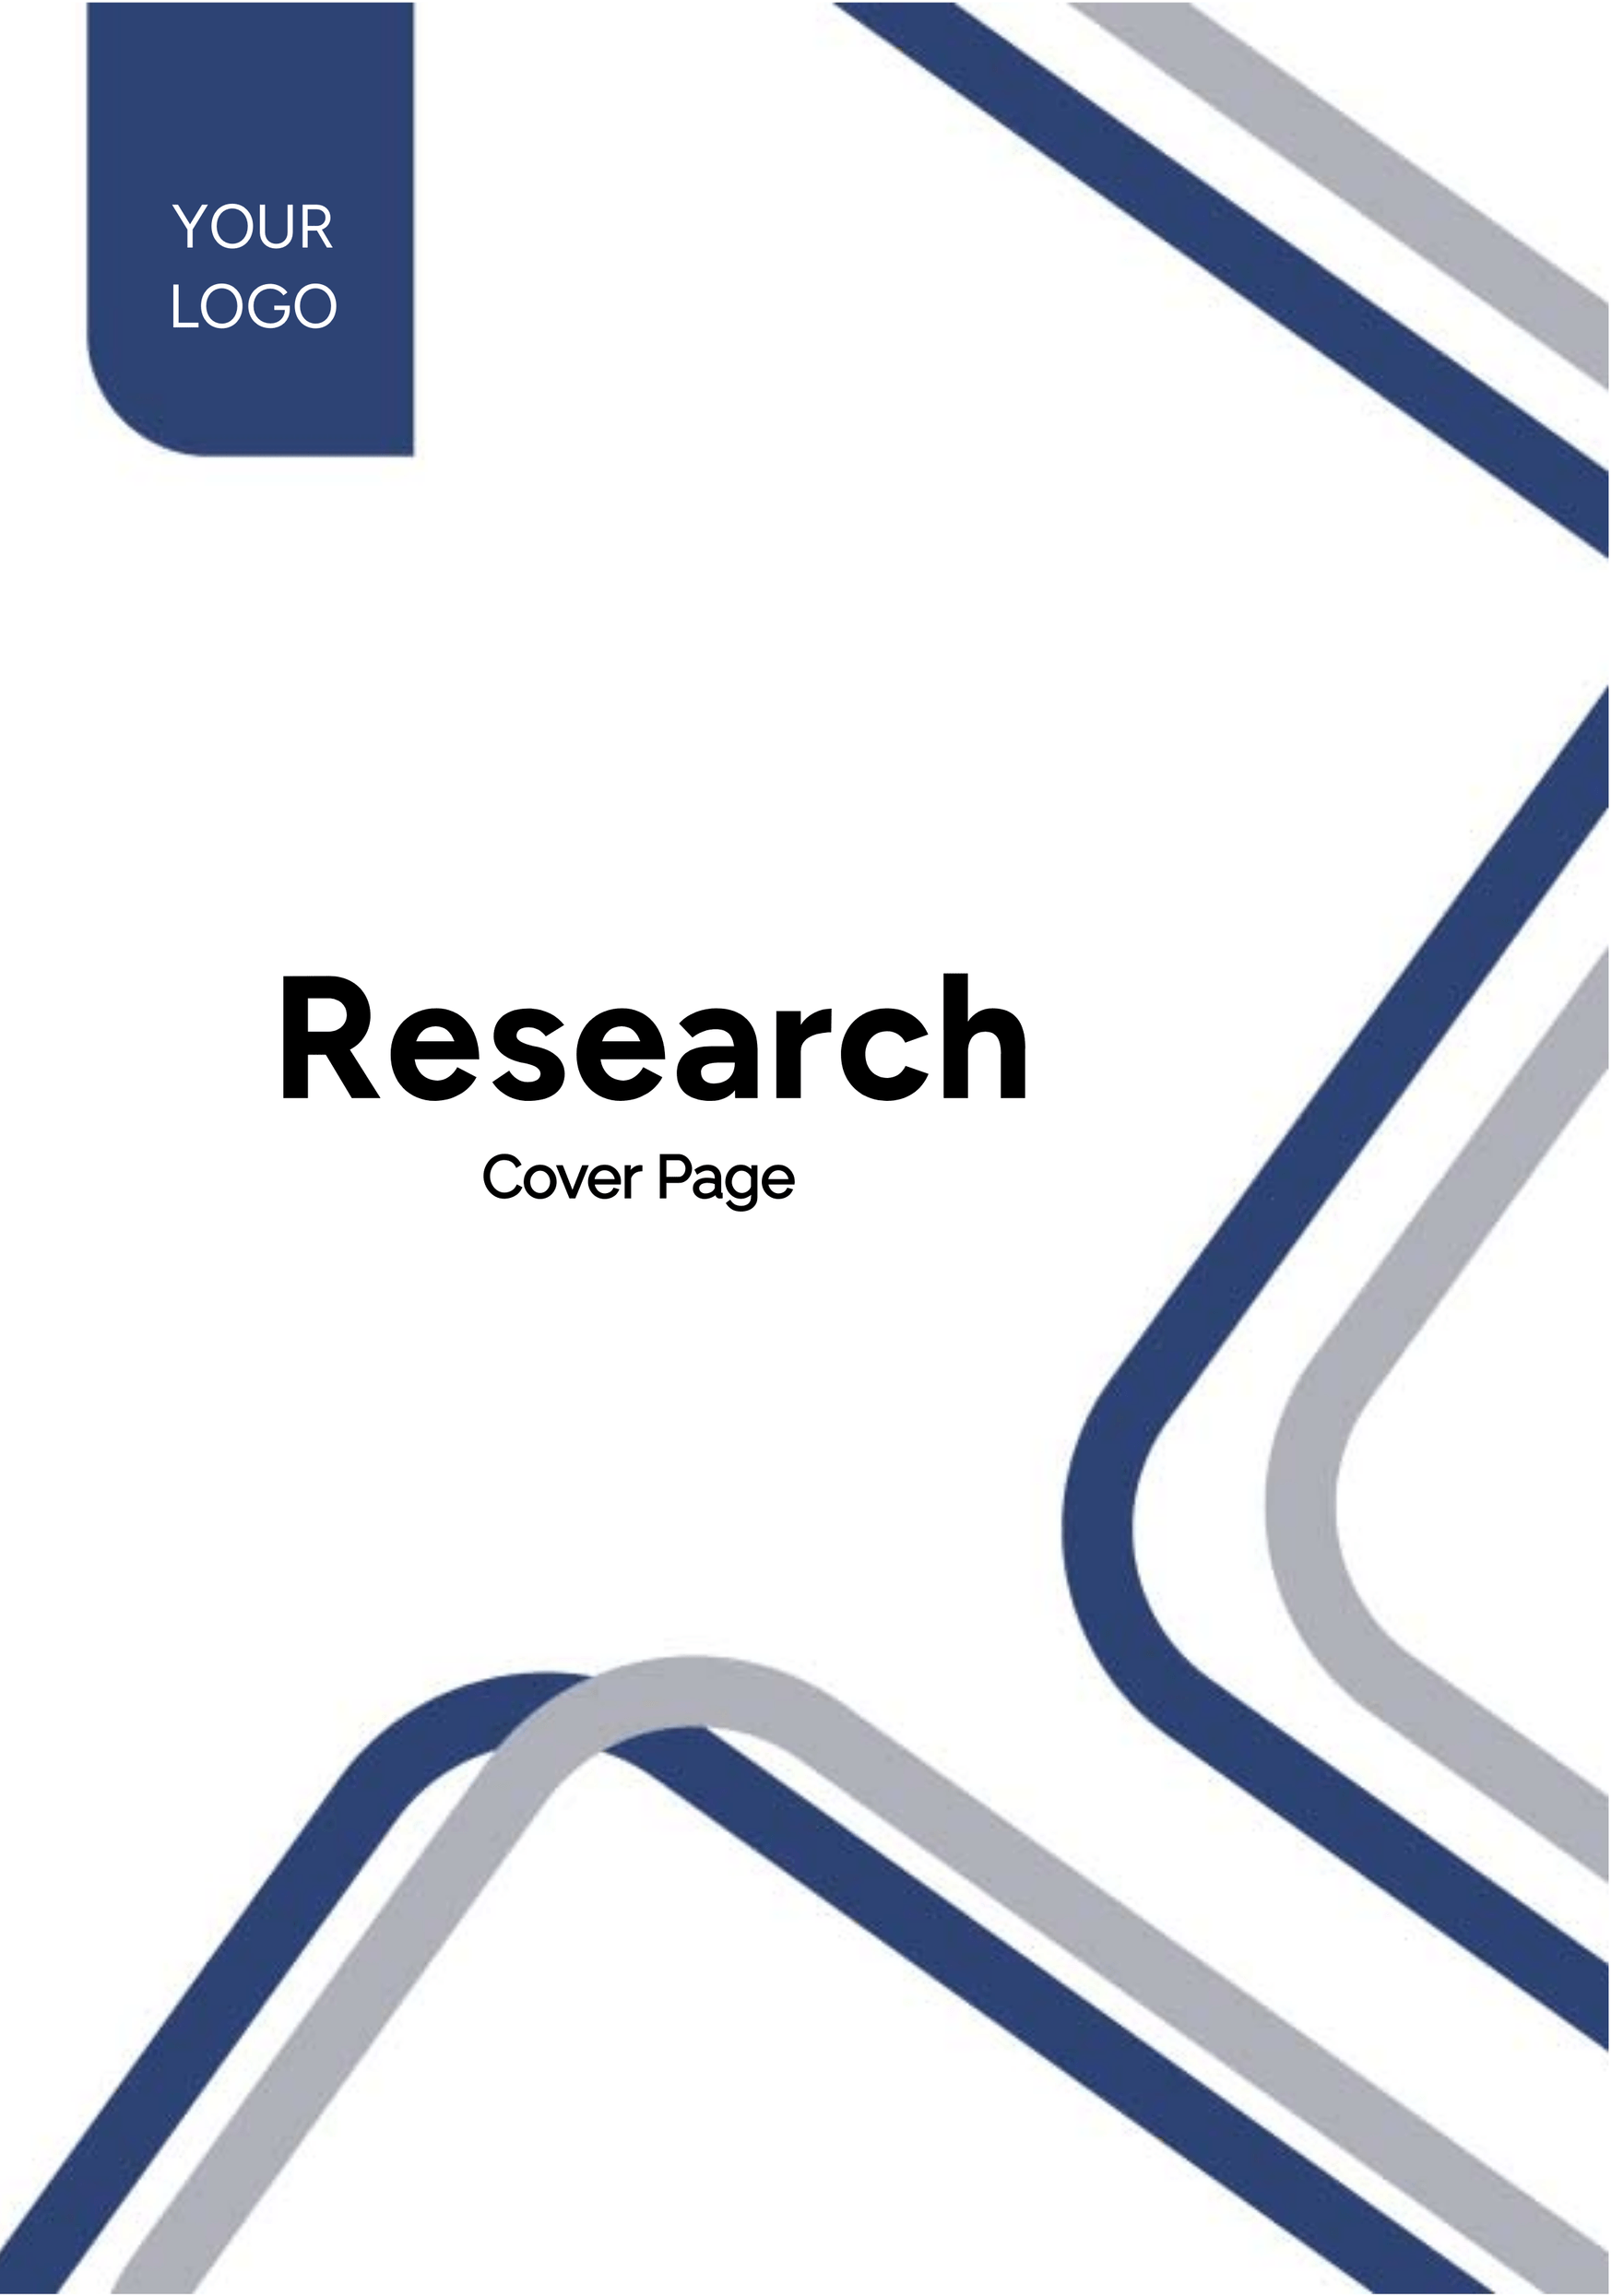 Research Cover Page Template